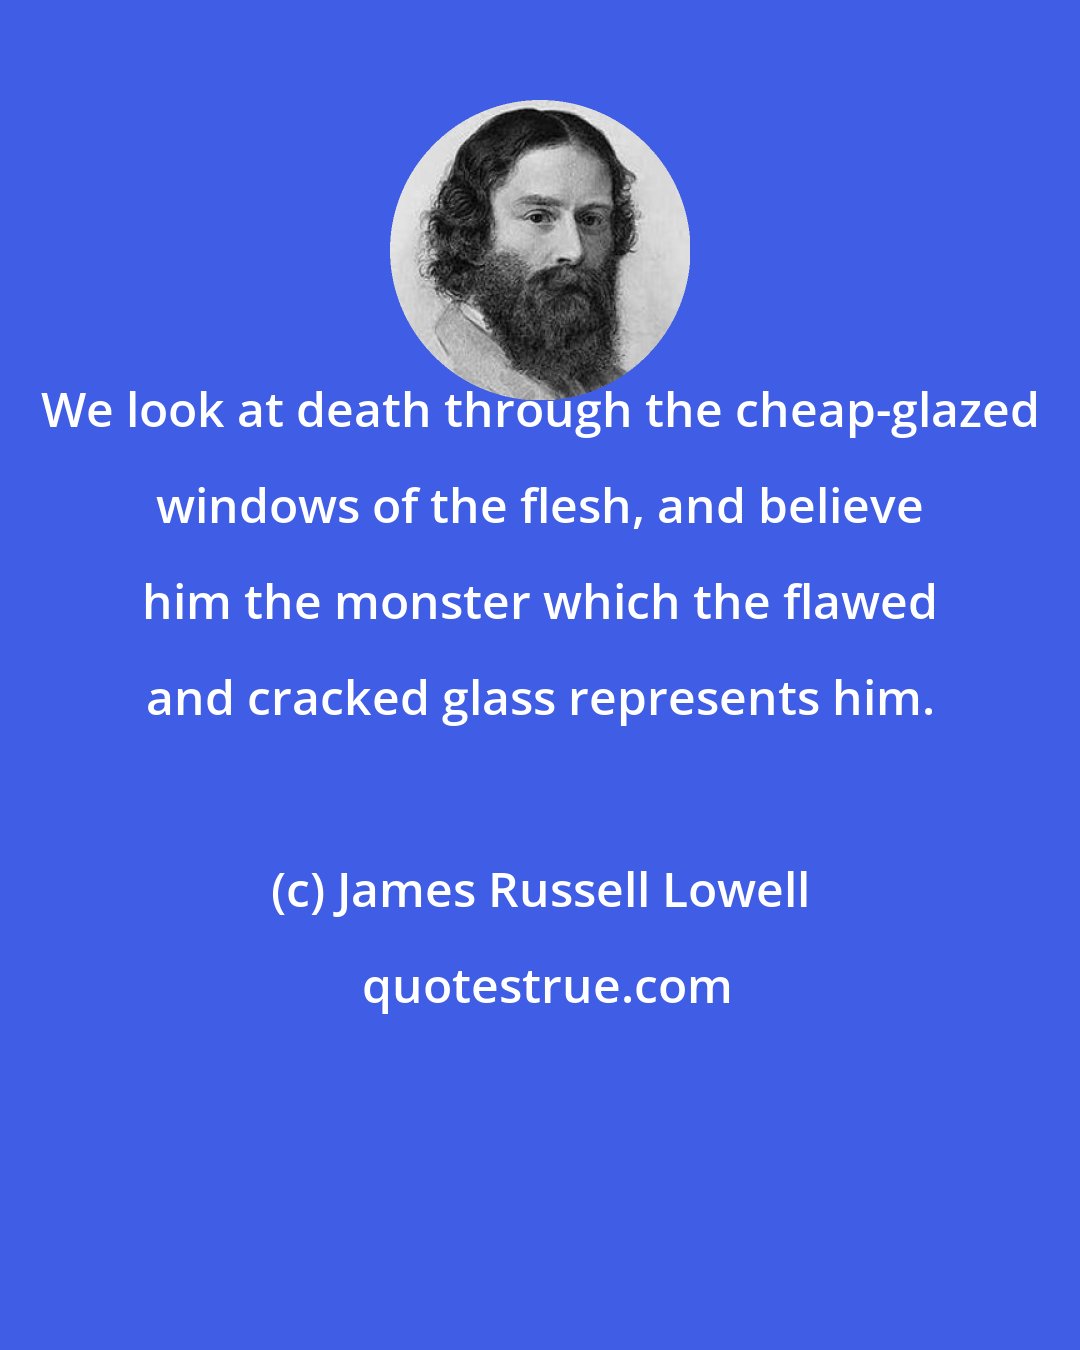 James Russell Lowell: We look at death through the cheap-glazed windows of the flesh, and believe him the monster which the flawed and cracked glass represents him.